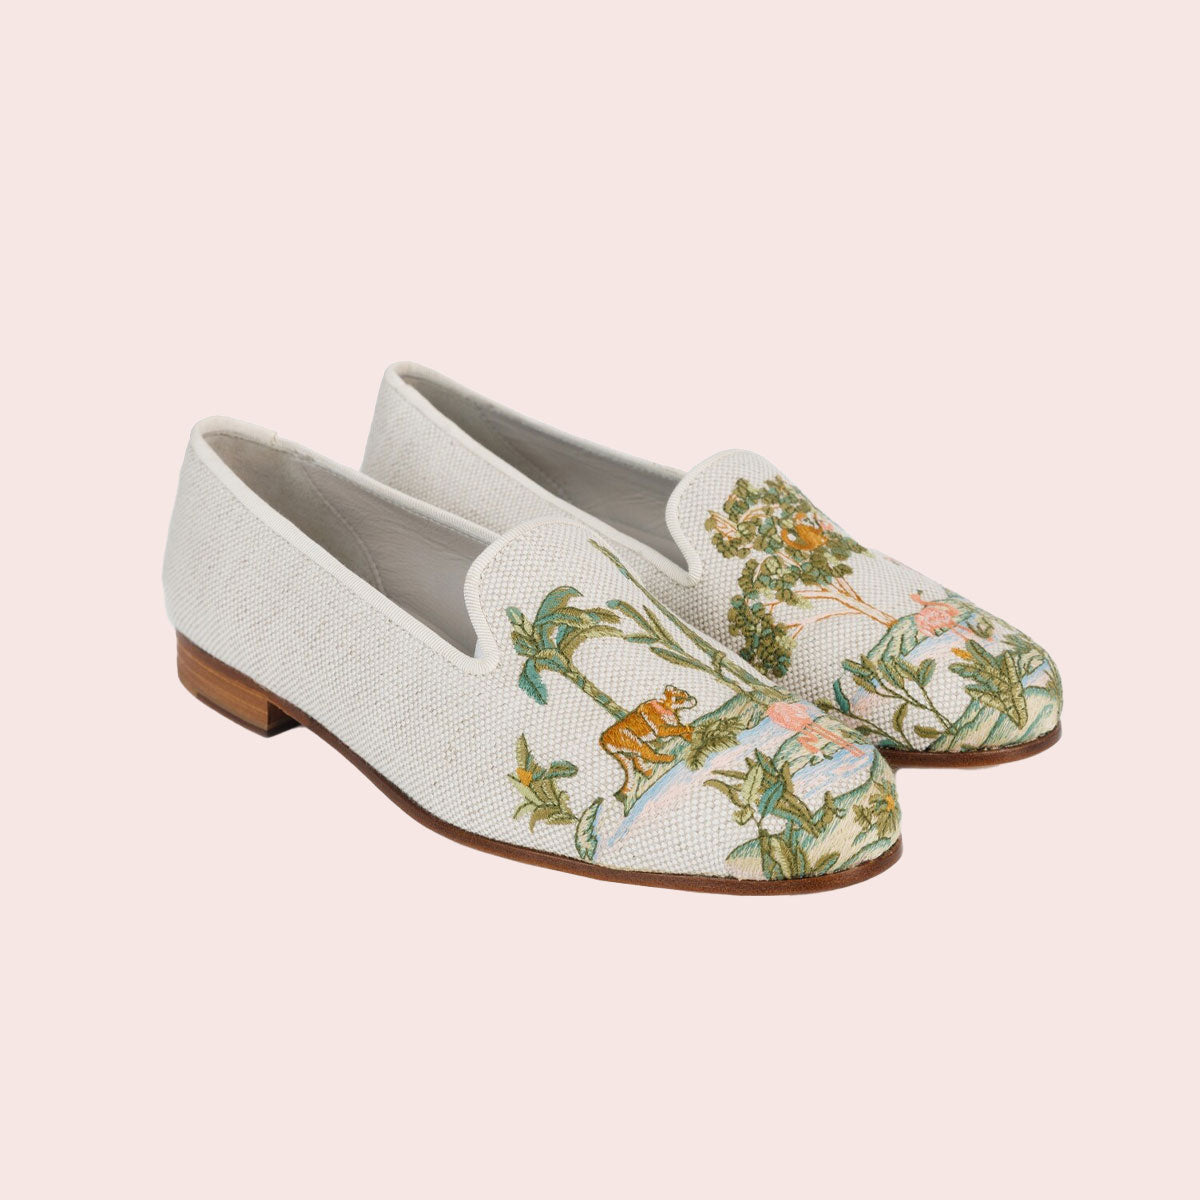 WOMEN'S COLONY X STUBBS & WOOTTON LOAFERS